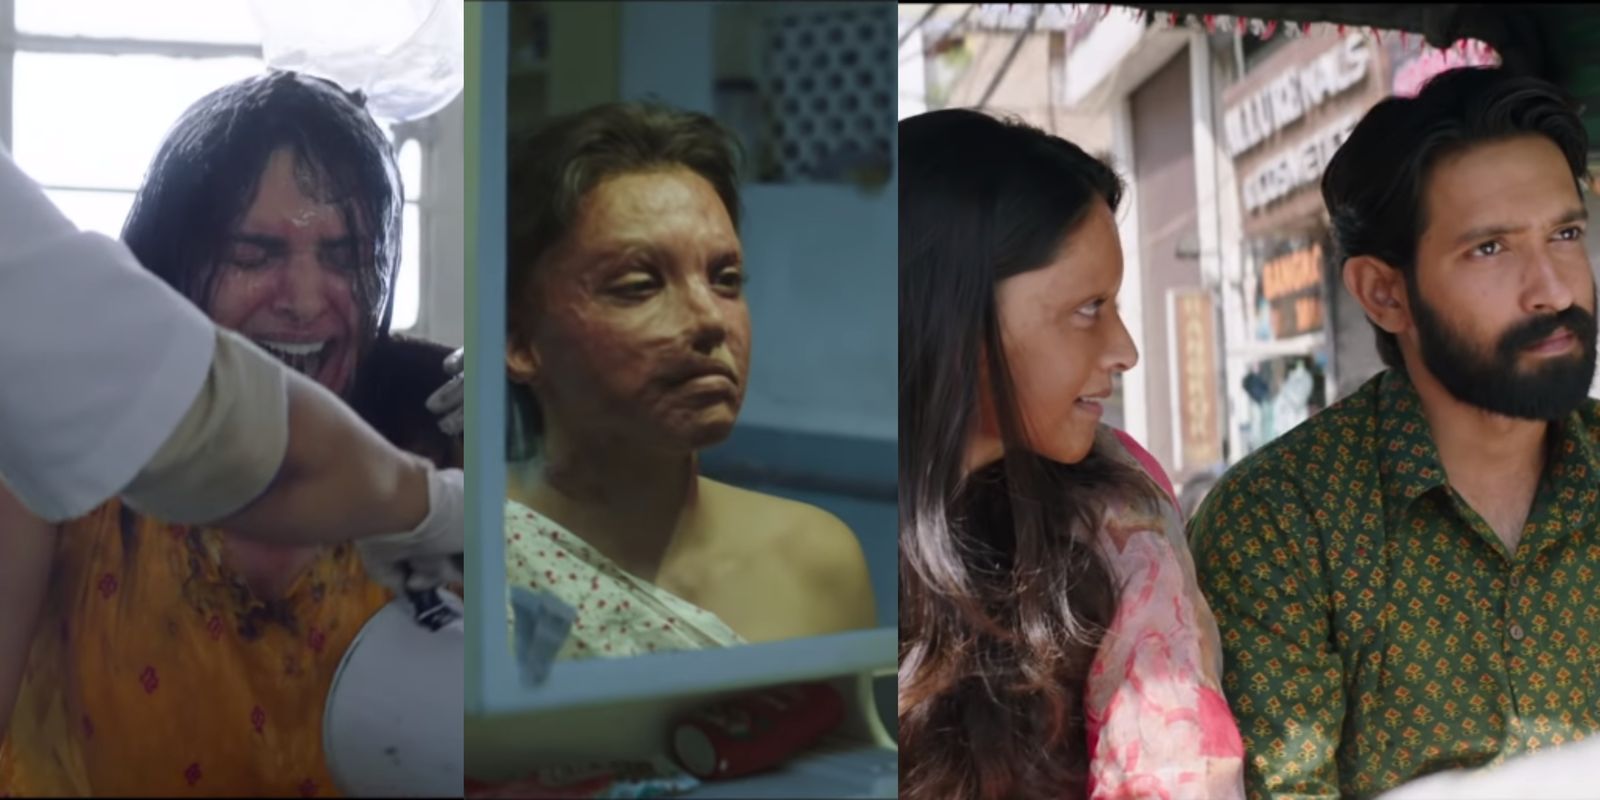 Chhapaak Trailer: Deepika Padukone Packs A Solid Punch As An Acid Attack Survivor In One Of The Most Impactful Trailers Ever!